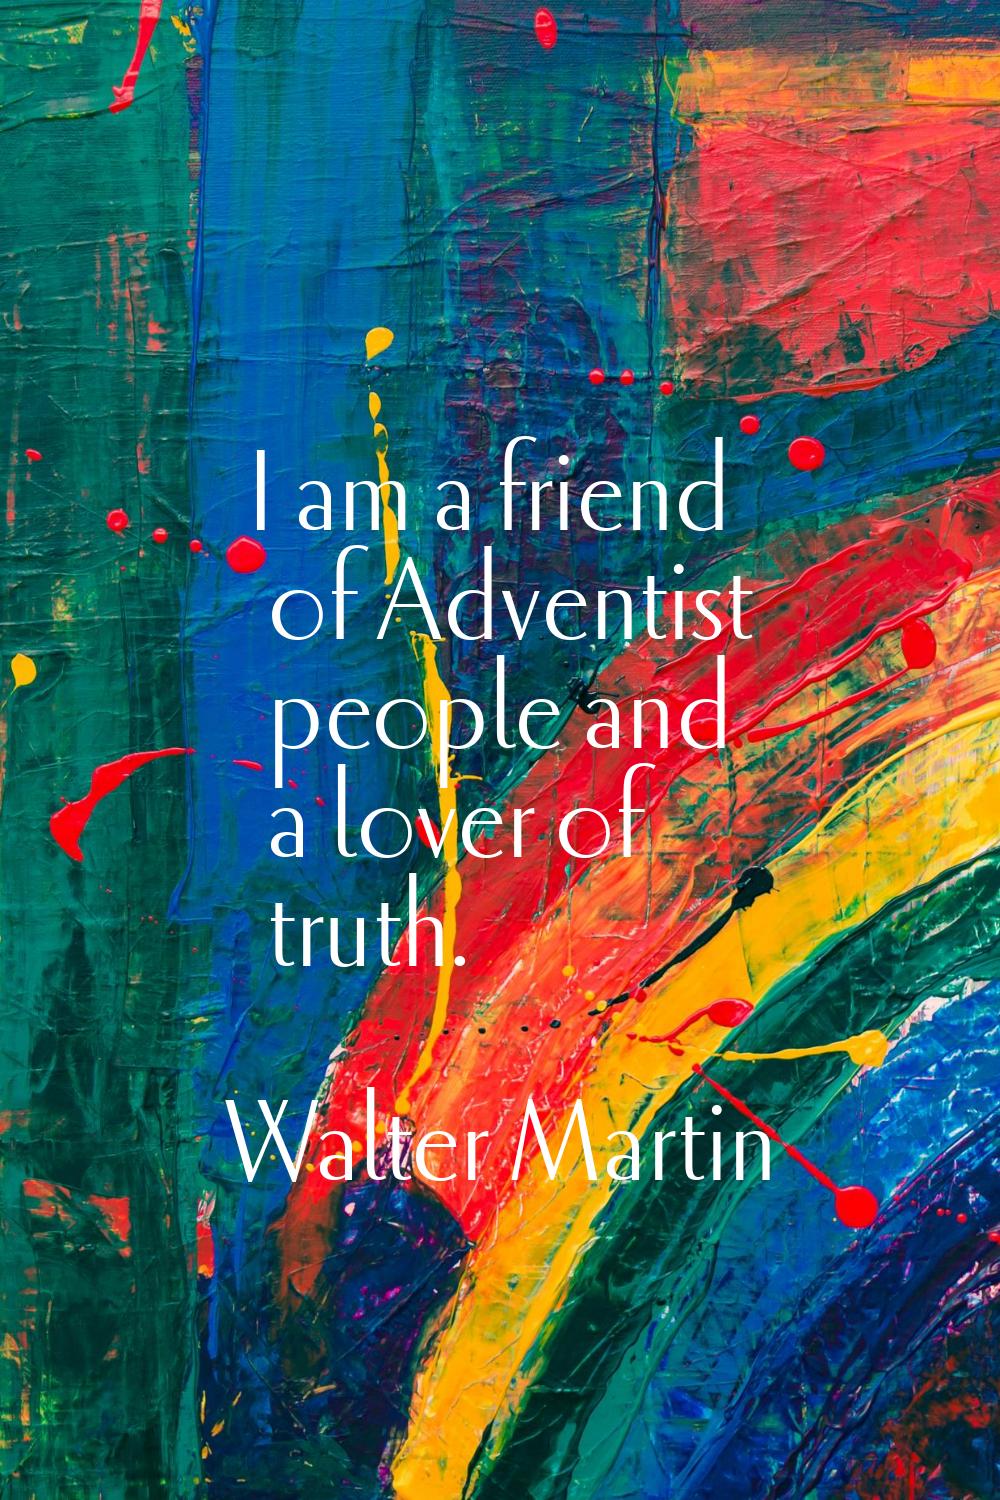 I am a friend of Adventist people and a lover of truth.